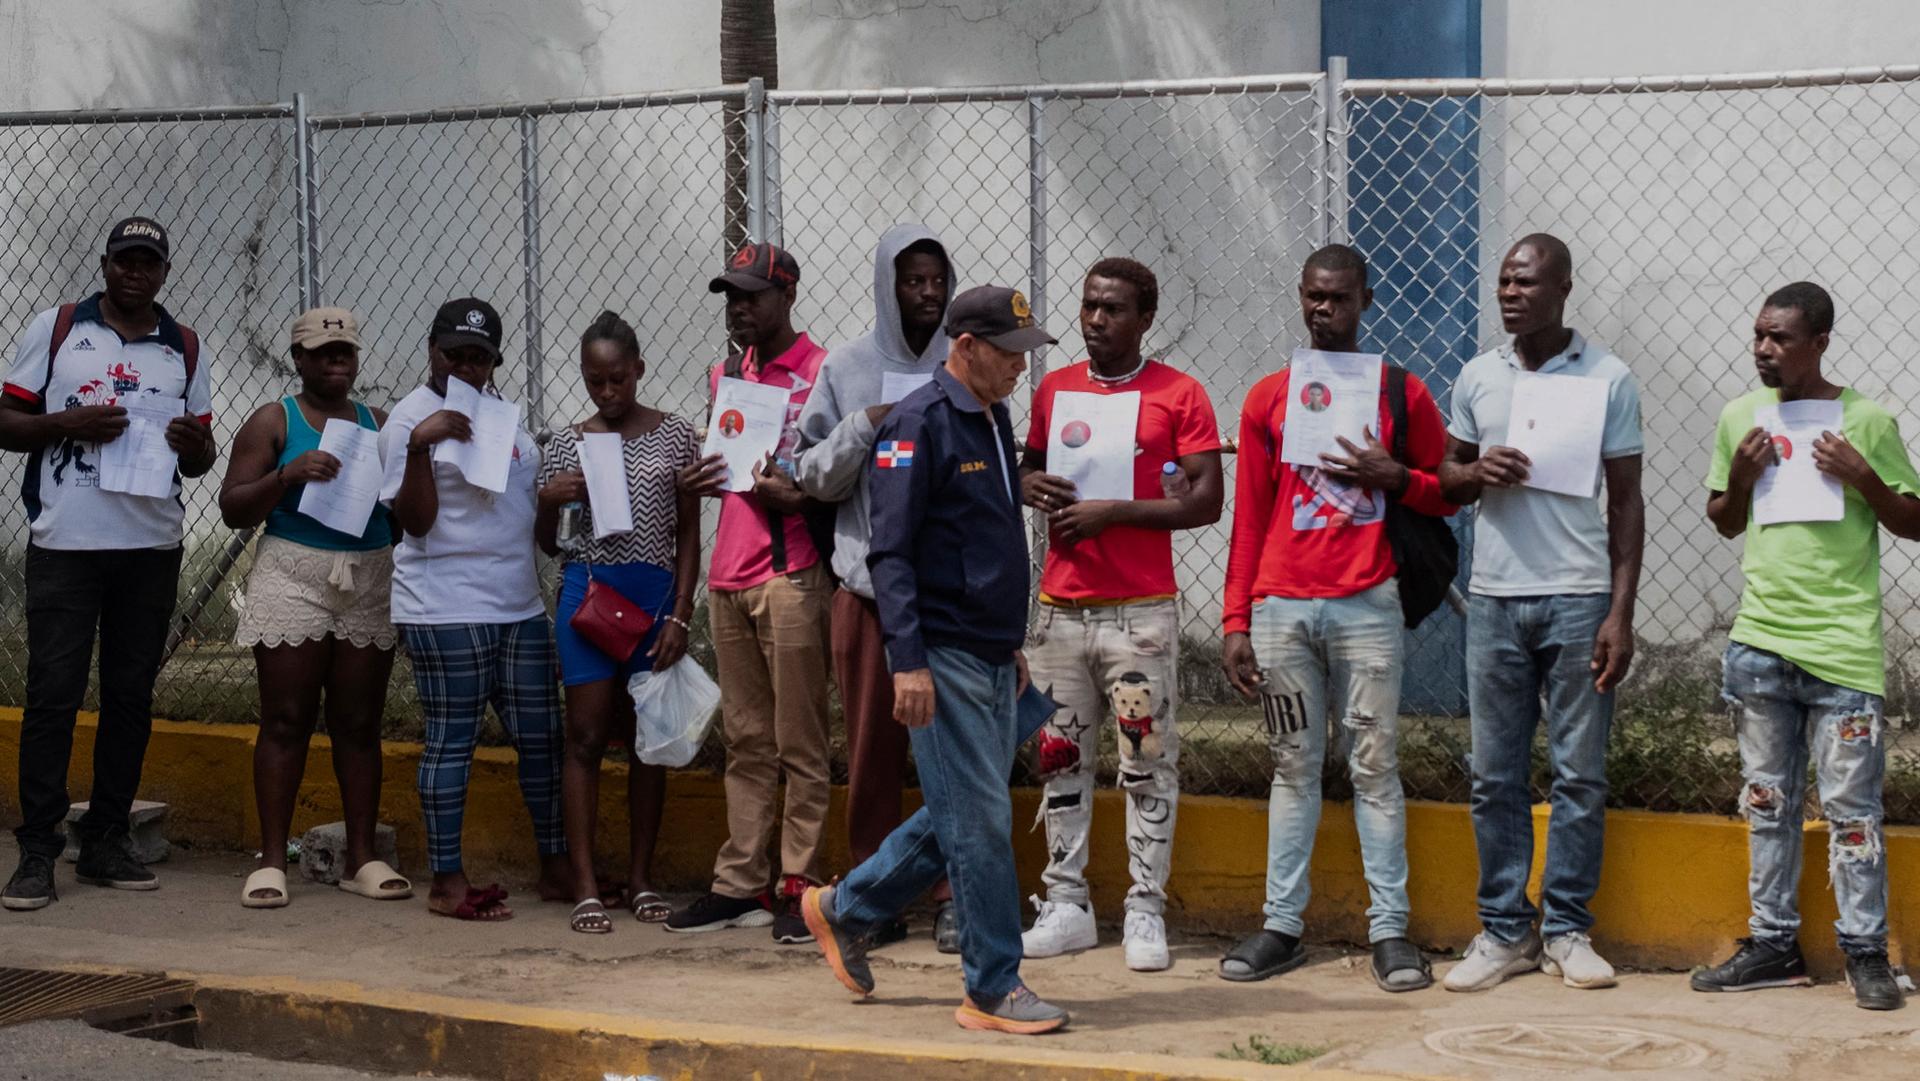 Haitians who were detained hold up their immigration status documents to prove they have work permits, in Haina, Dominican Republic, March 16, 2024.